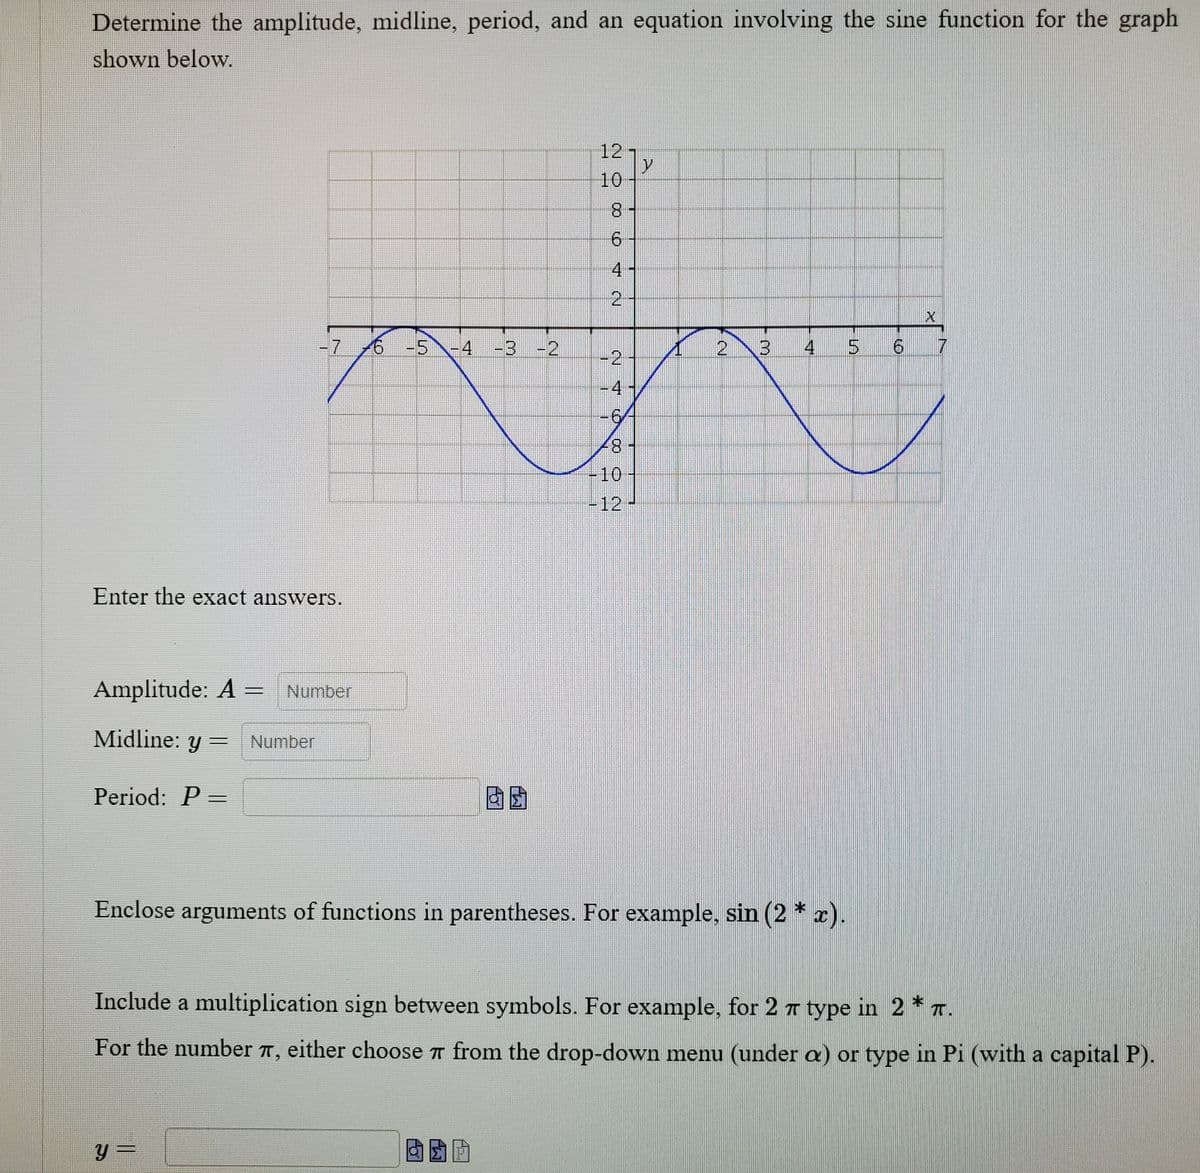 Determine the amplitude, midline, period, and an equation involving the sine function for the graph
shown below.
12
10
8.
4
2.
-7
6 -5-4 -3 -2
2 3
4
9.
-2
-4-
-6
+87
-10
-12-
Enter the exact answers.
Amplitude: A =
Number
Midline: y =
Number
Period: P =
Enclose arguments of functions in parentheses. For example, sin (2 * x).
Include a multiplication sign between symbols. For example, for 2 7 type in 2 * T.
For the number T, either choose 7 from the drop-down menu (under a) or type in Pi (with a capital P).
y =
%3D
寸
